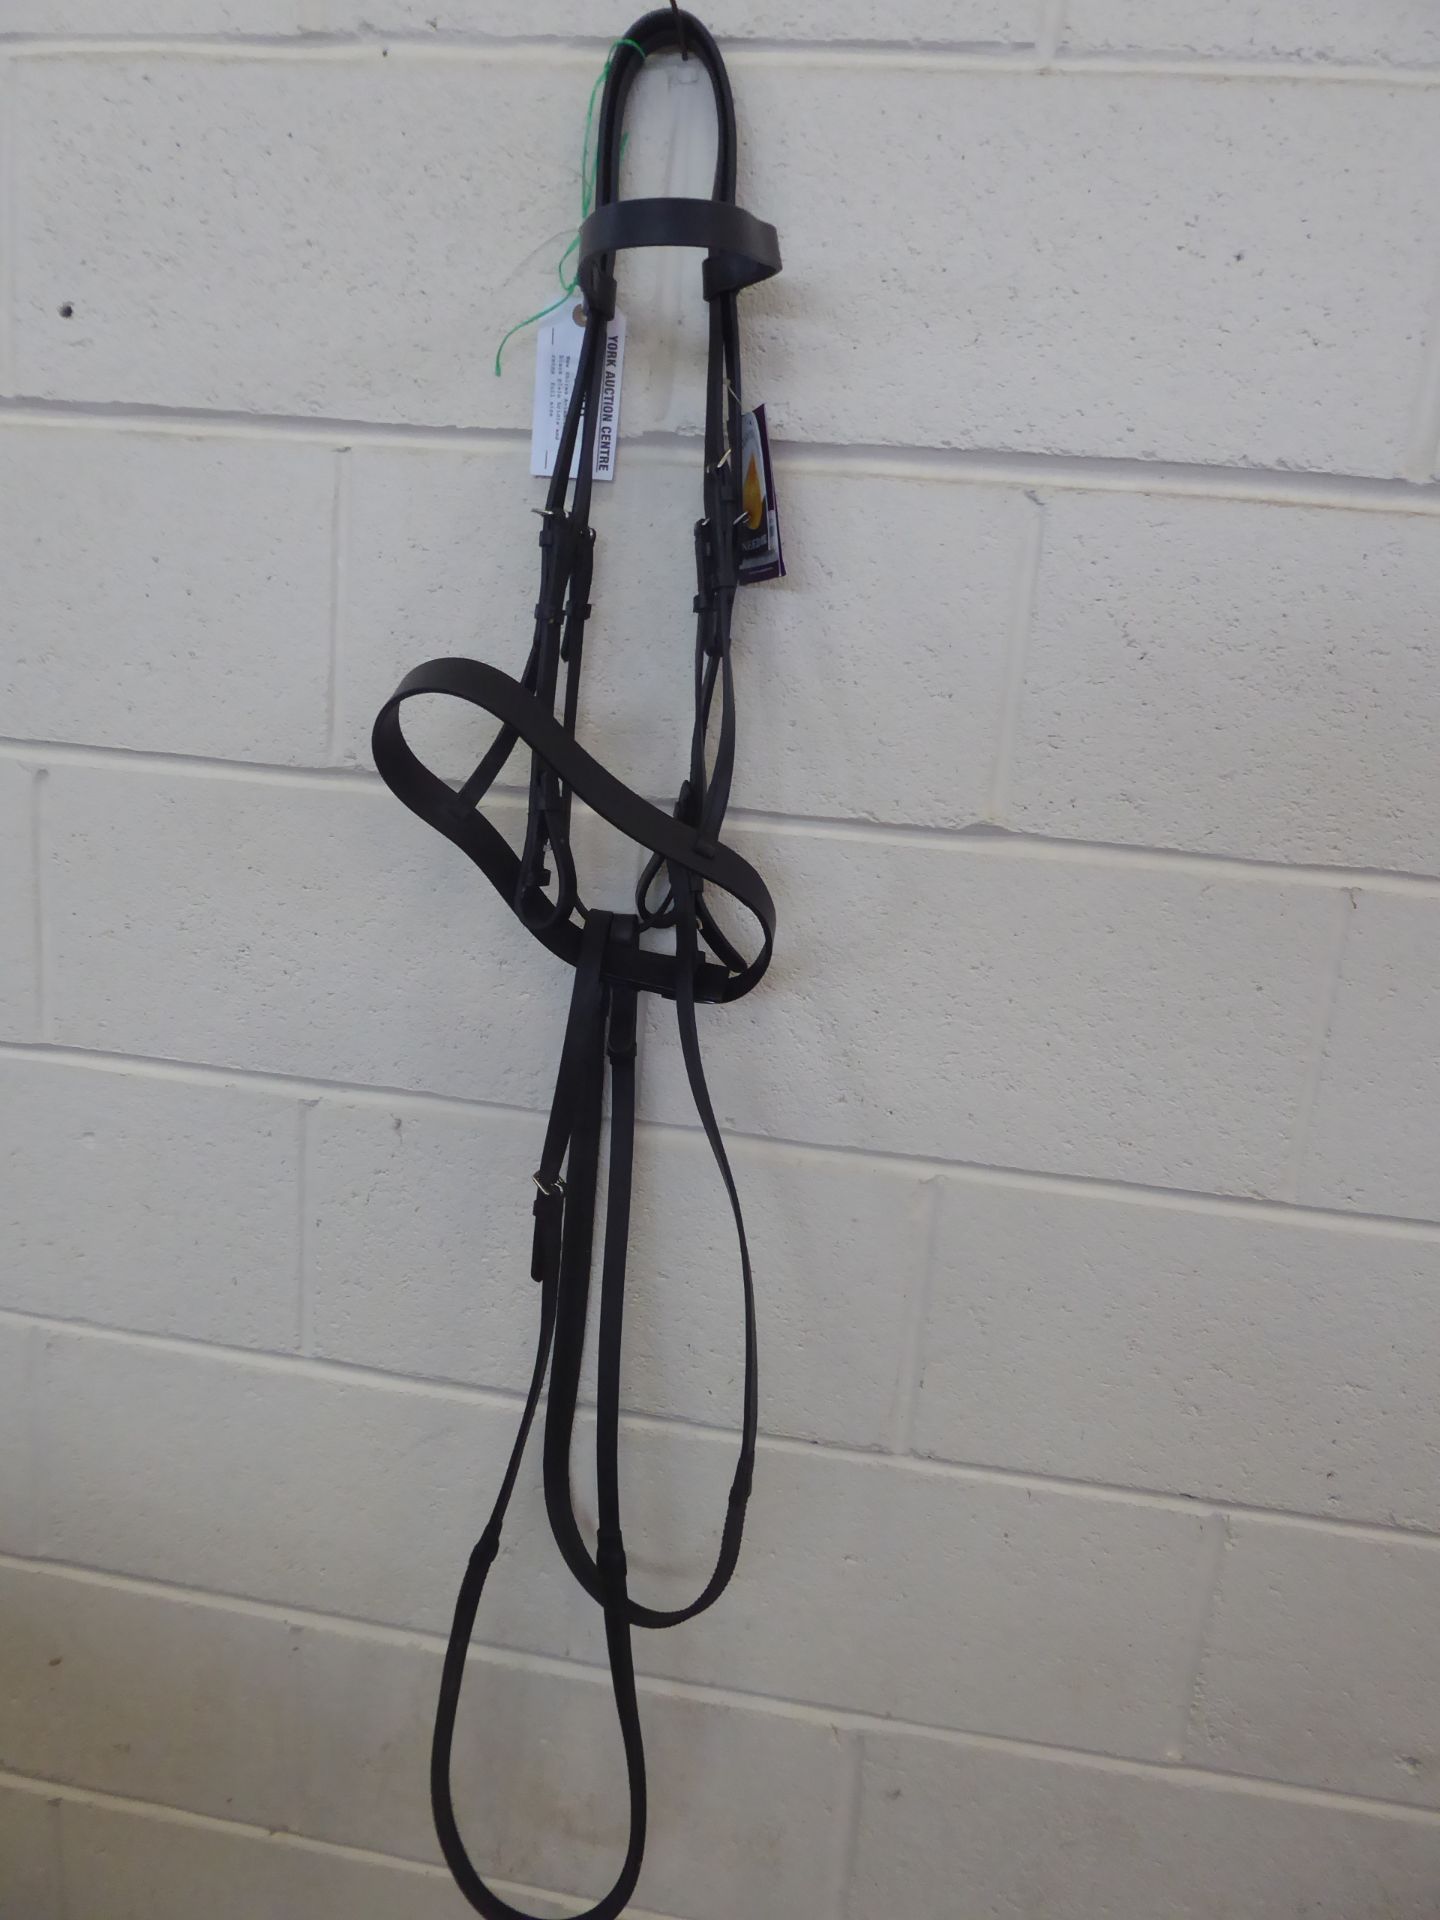 New Shires Aviemore black plain bridle and reins, full size